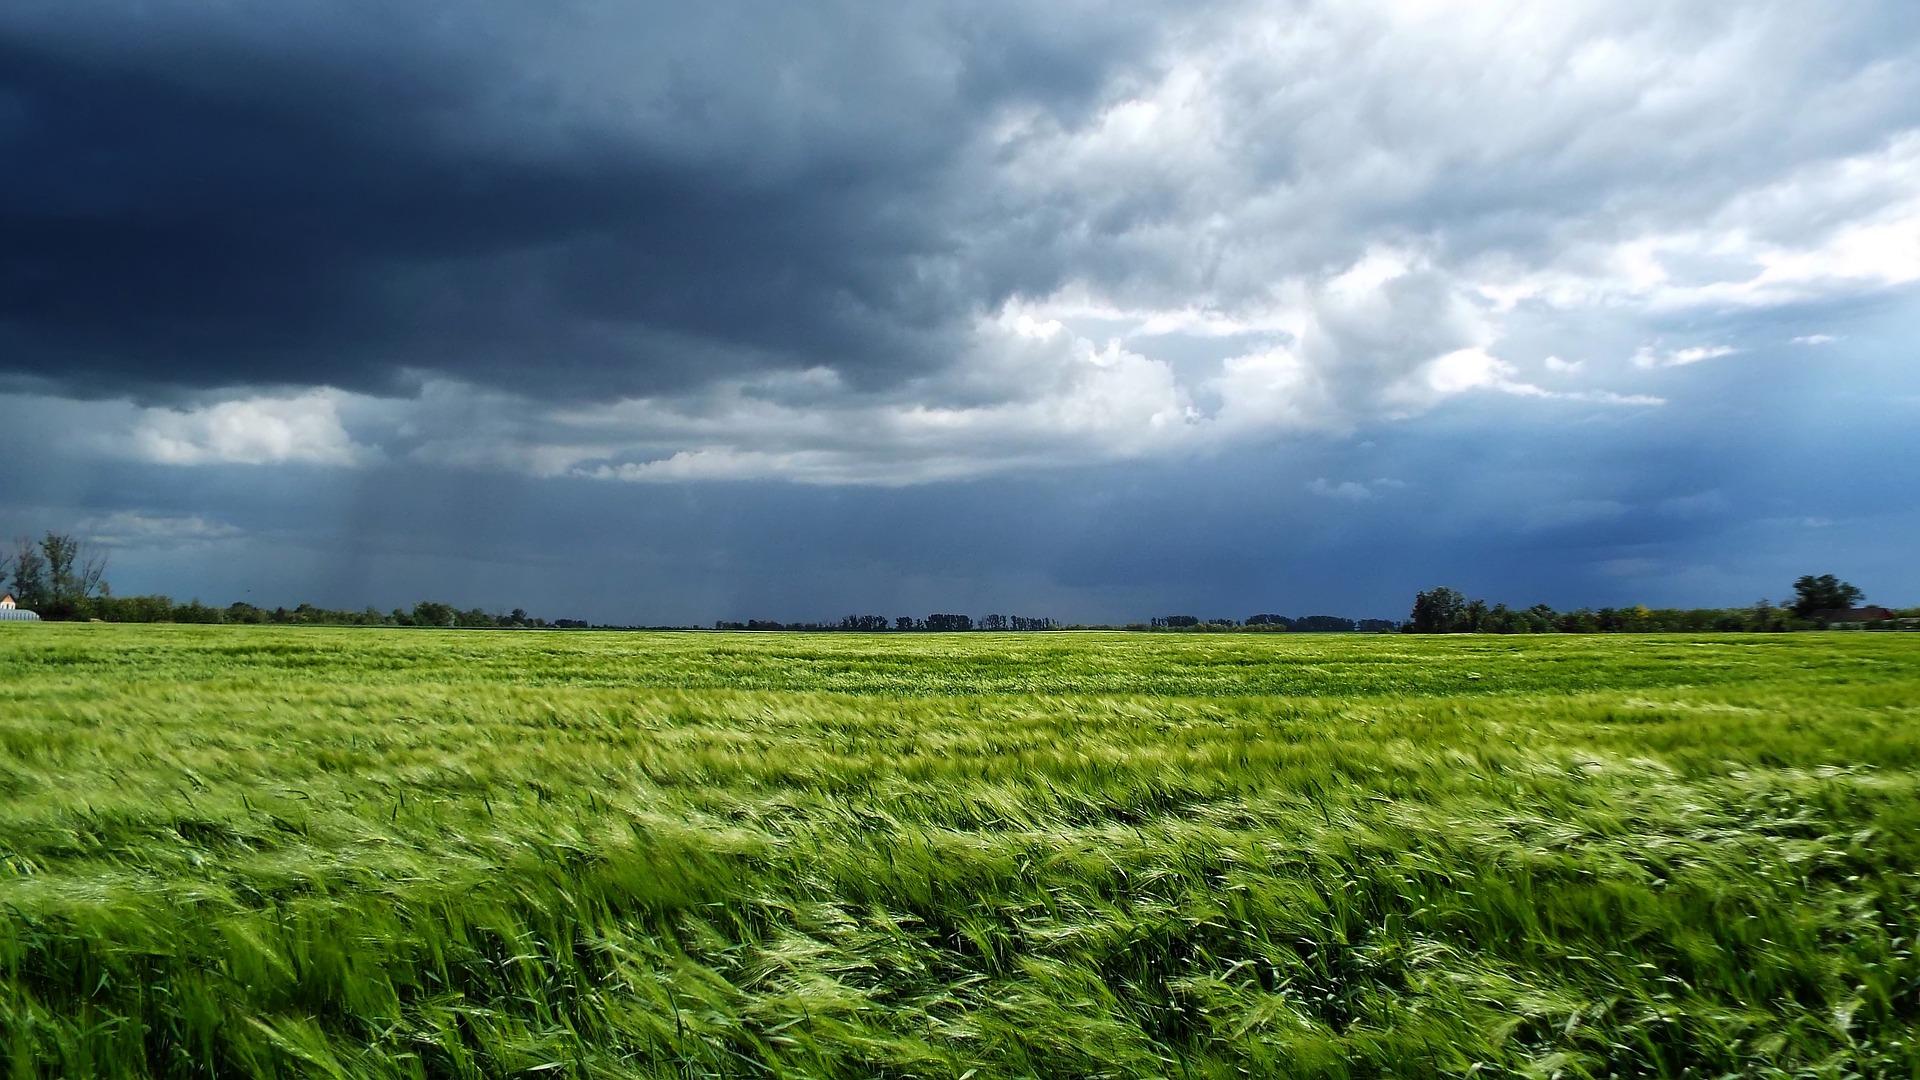 Storm clouds over wheat fields